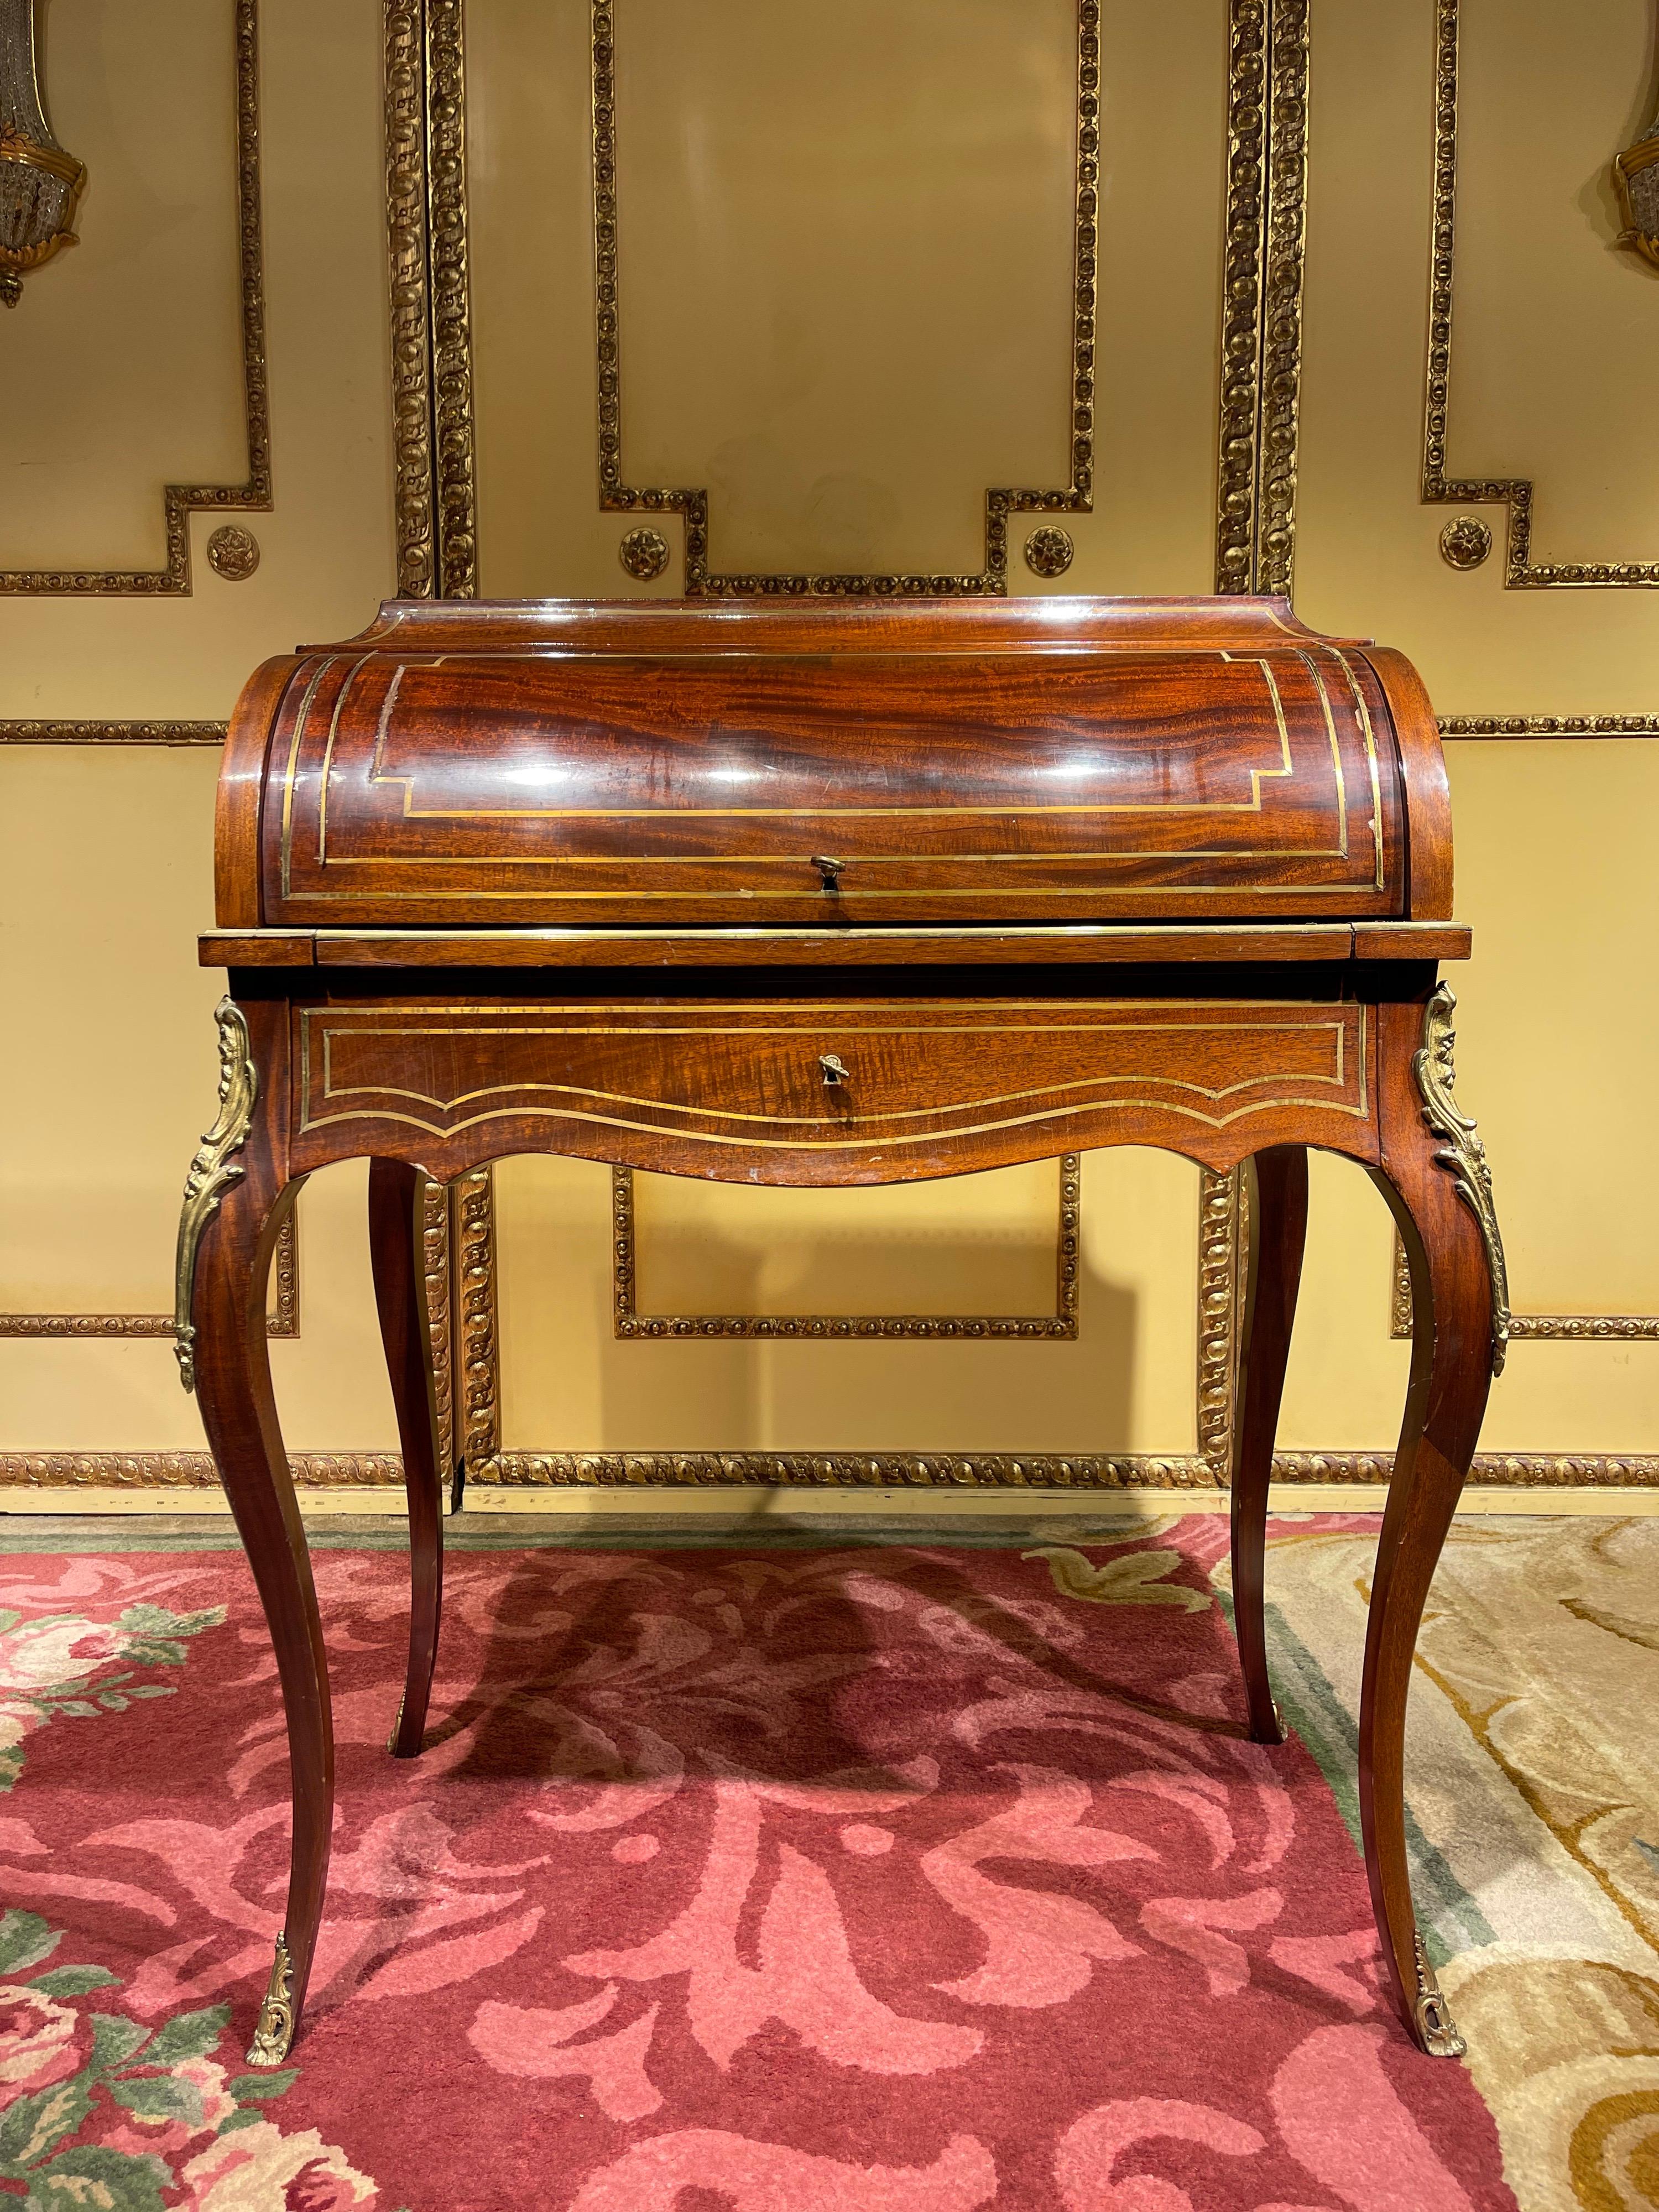 Unique French roll-up secretary/desk in the transition style from around 1890

Mahogany and brass inlays. Writing surface and compartments can be pulled out under roller closure. Cut-out frame drawer. brass gallery. Veneered on the back. High